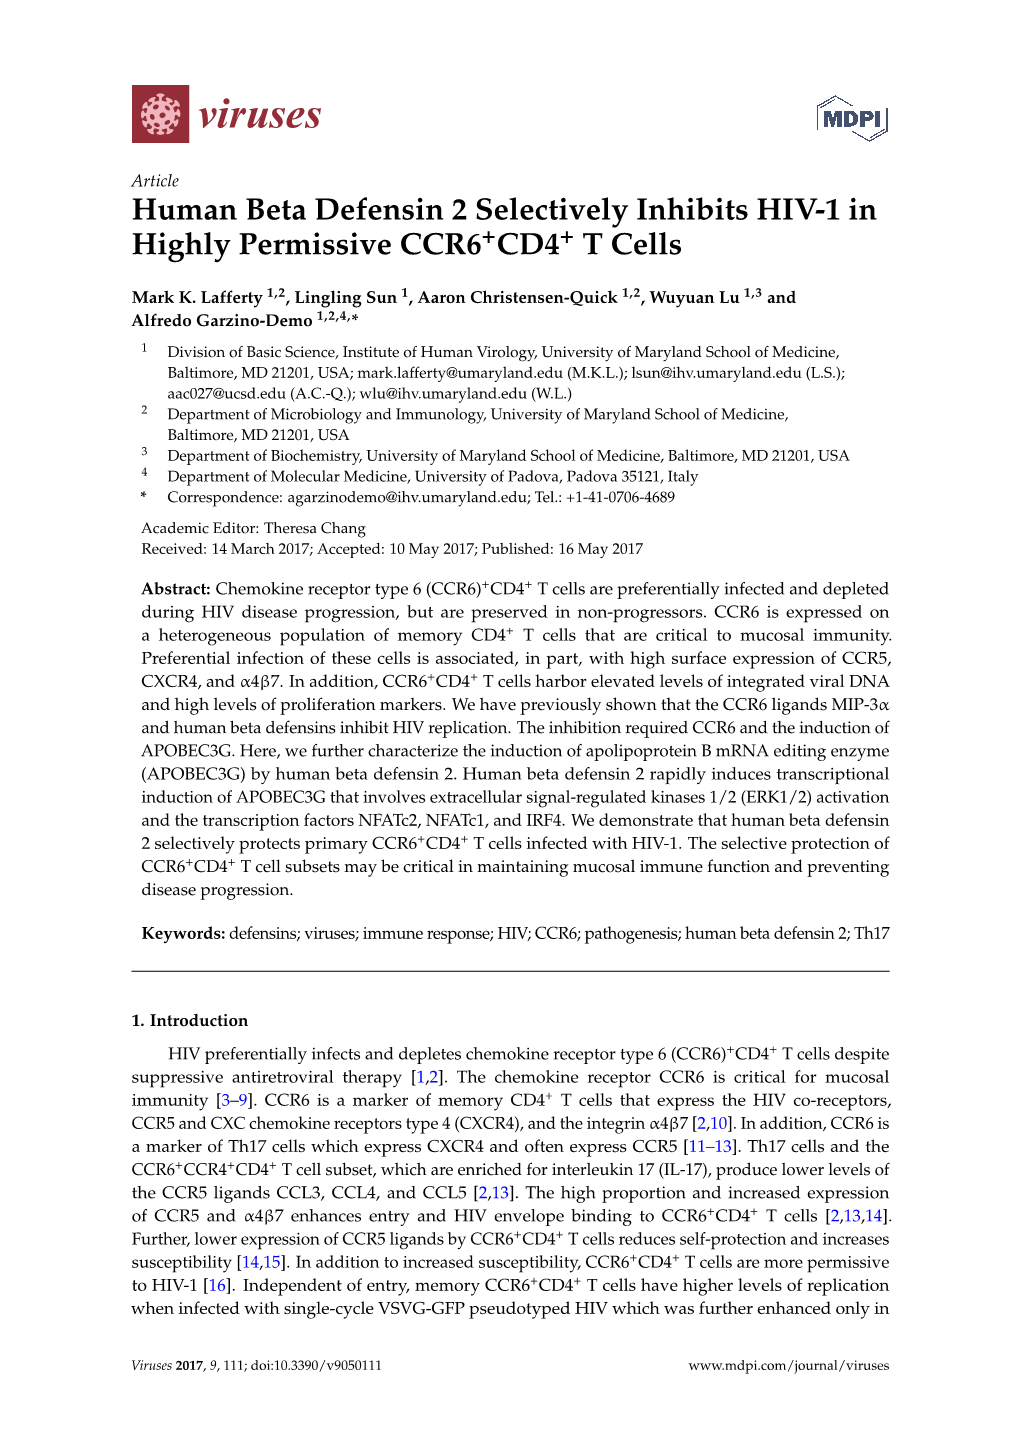 Human Beta Defensin 2 Selectively Inhibits HIV-1 in Highly Permissive CCR6+CD4+ T Cells